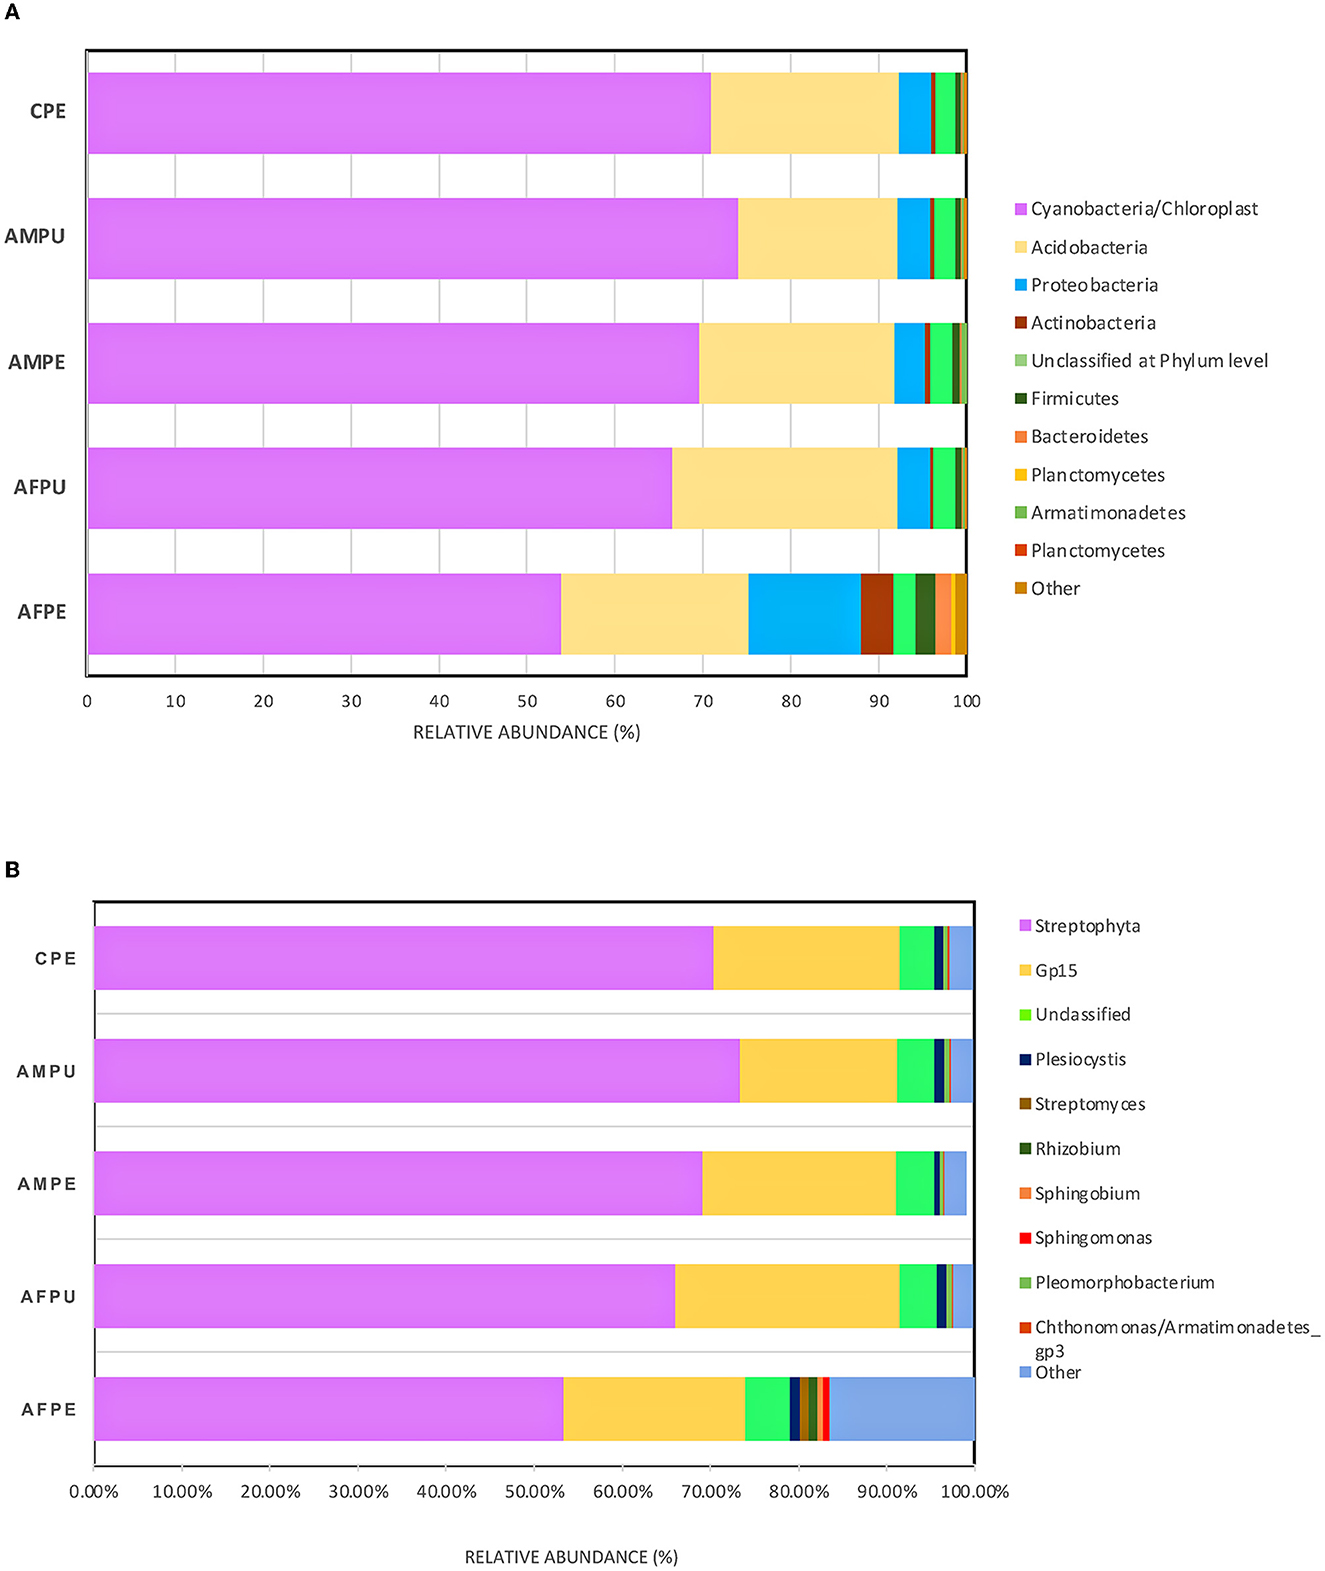 Frontiers Microbiota And Its Antibiotic Resistance Profile